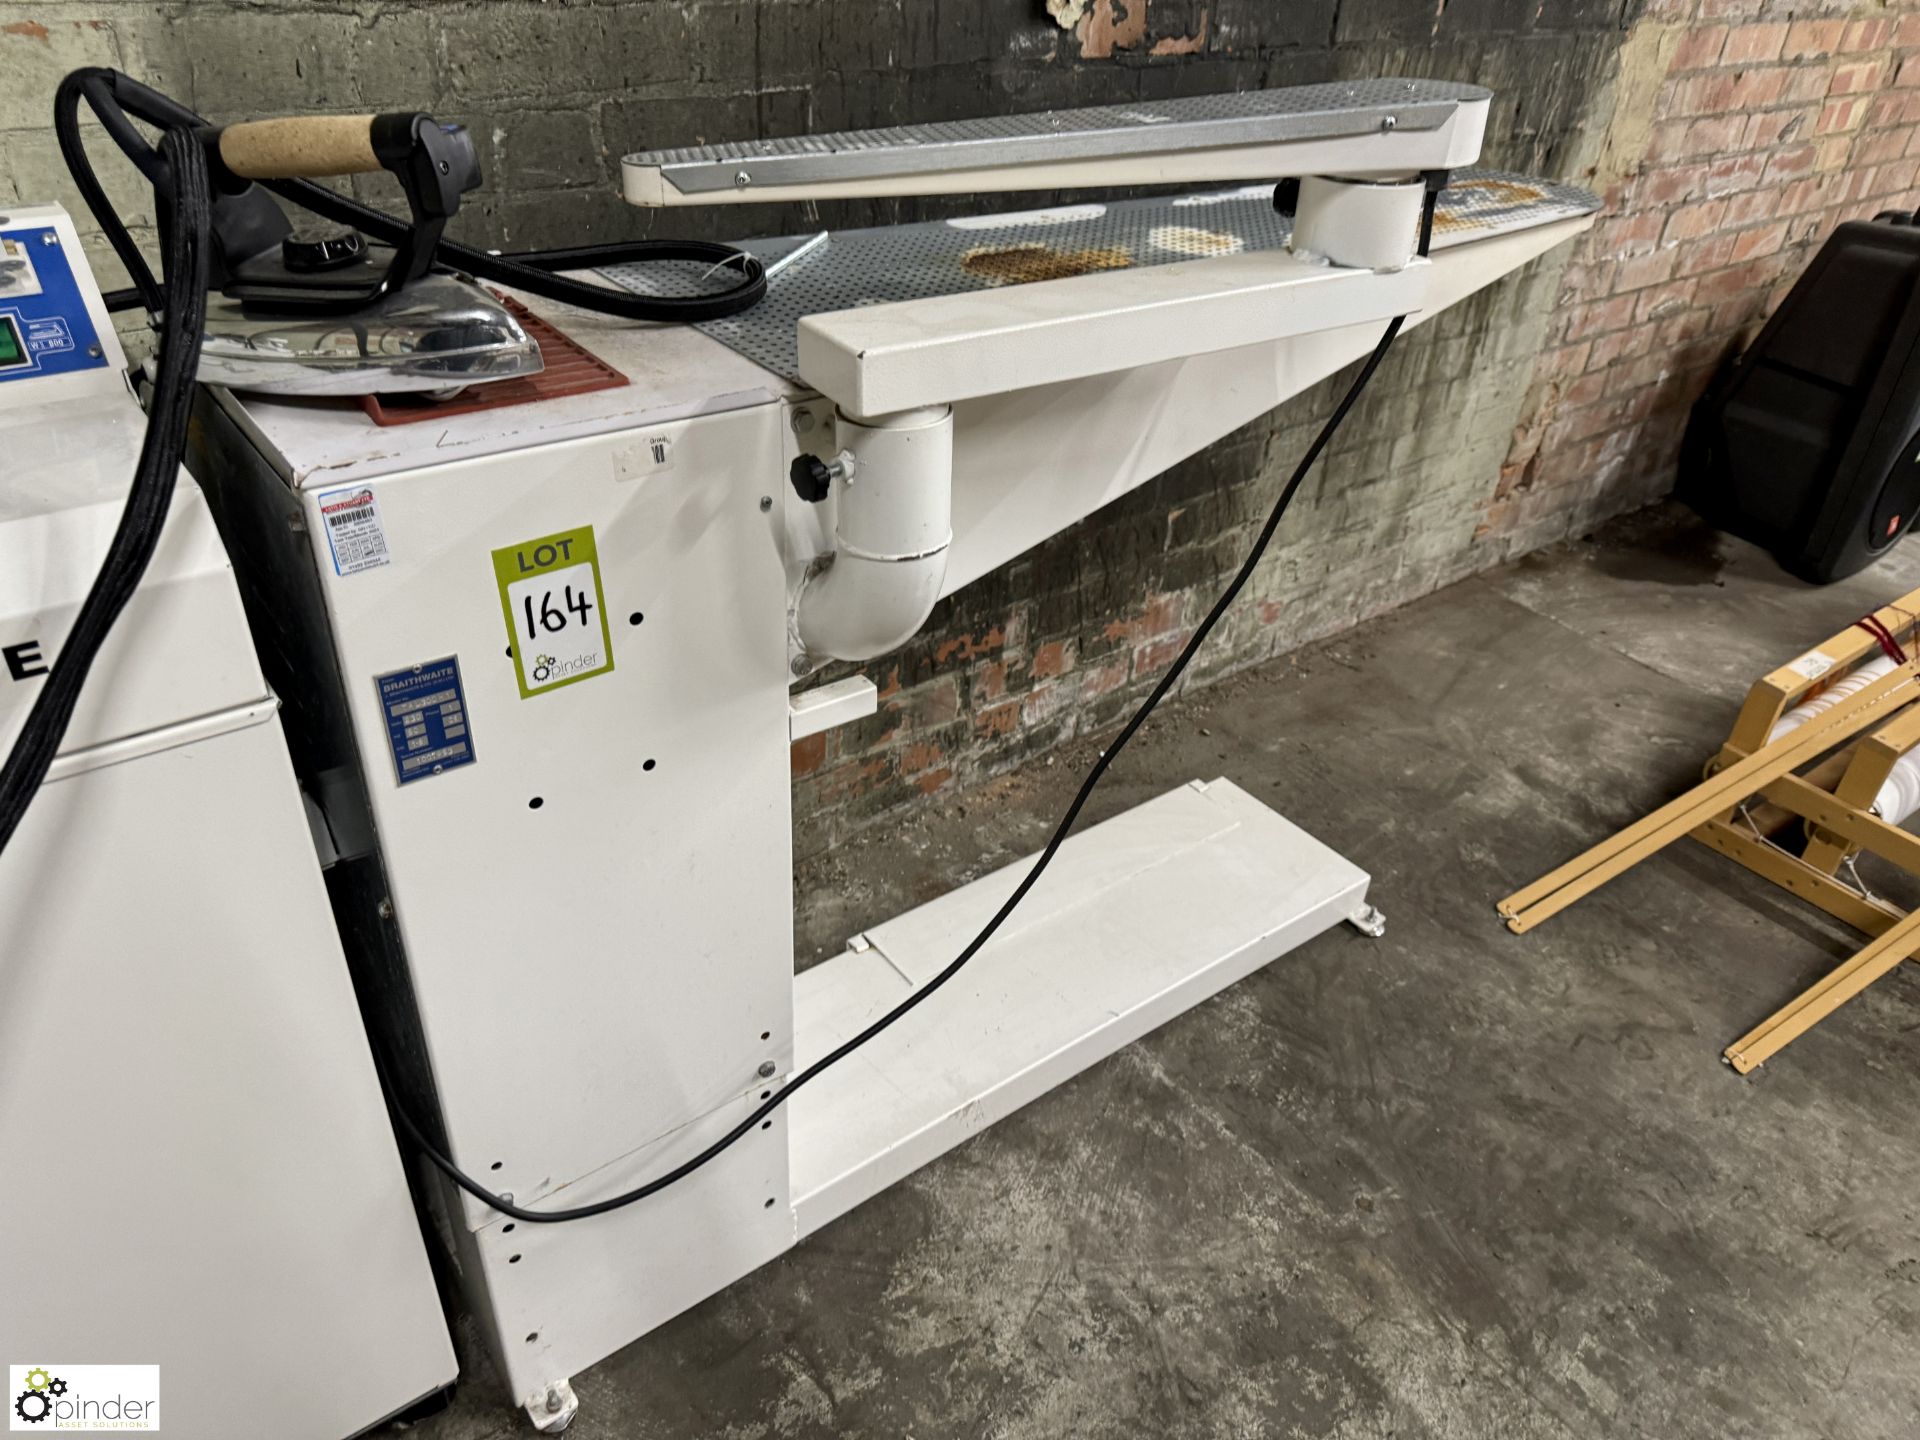 Braithwaite Reverbi Steam Ironing Boiler, with 2 irons and 2 heated ironing tables, 240volts, with - Image 7 of 9